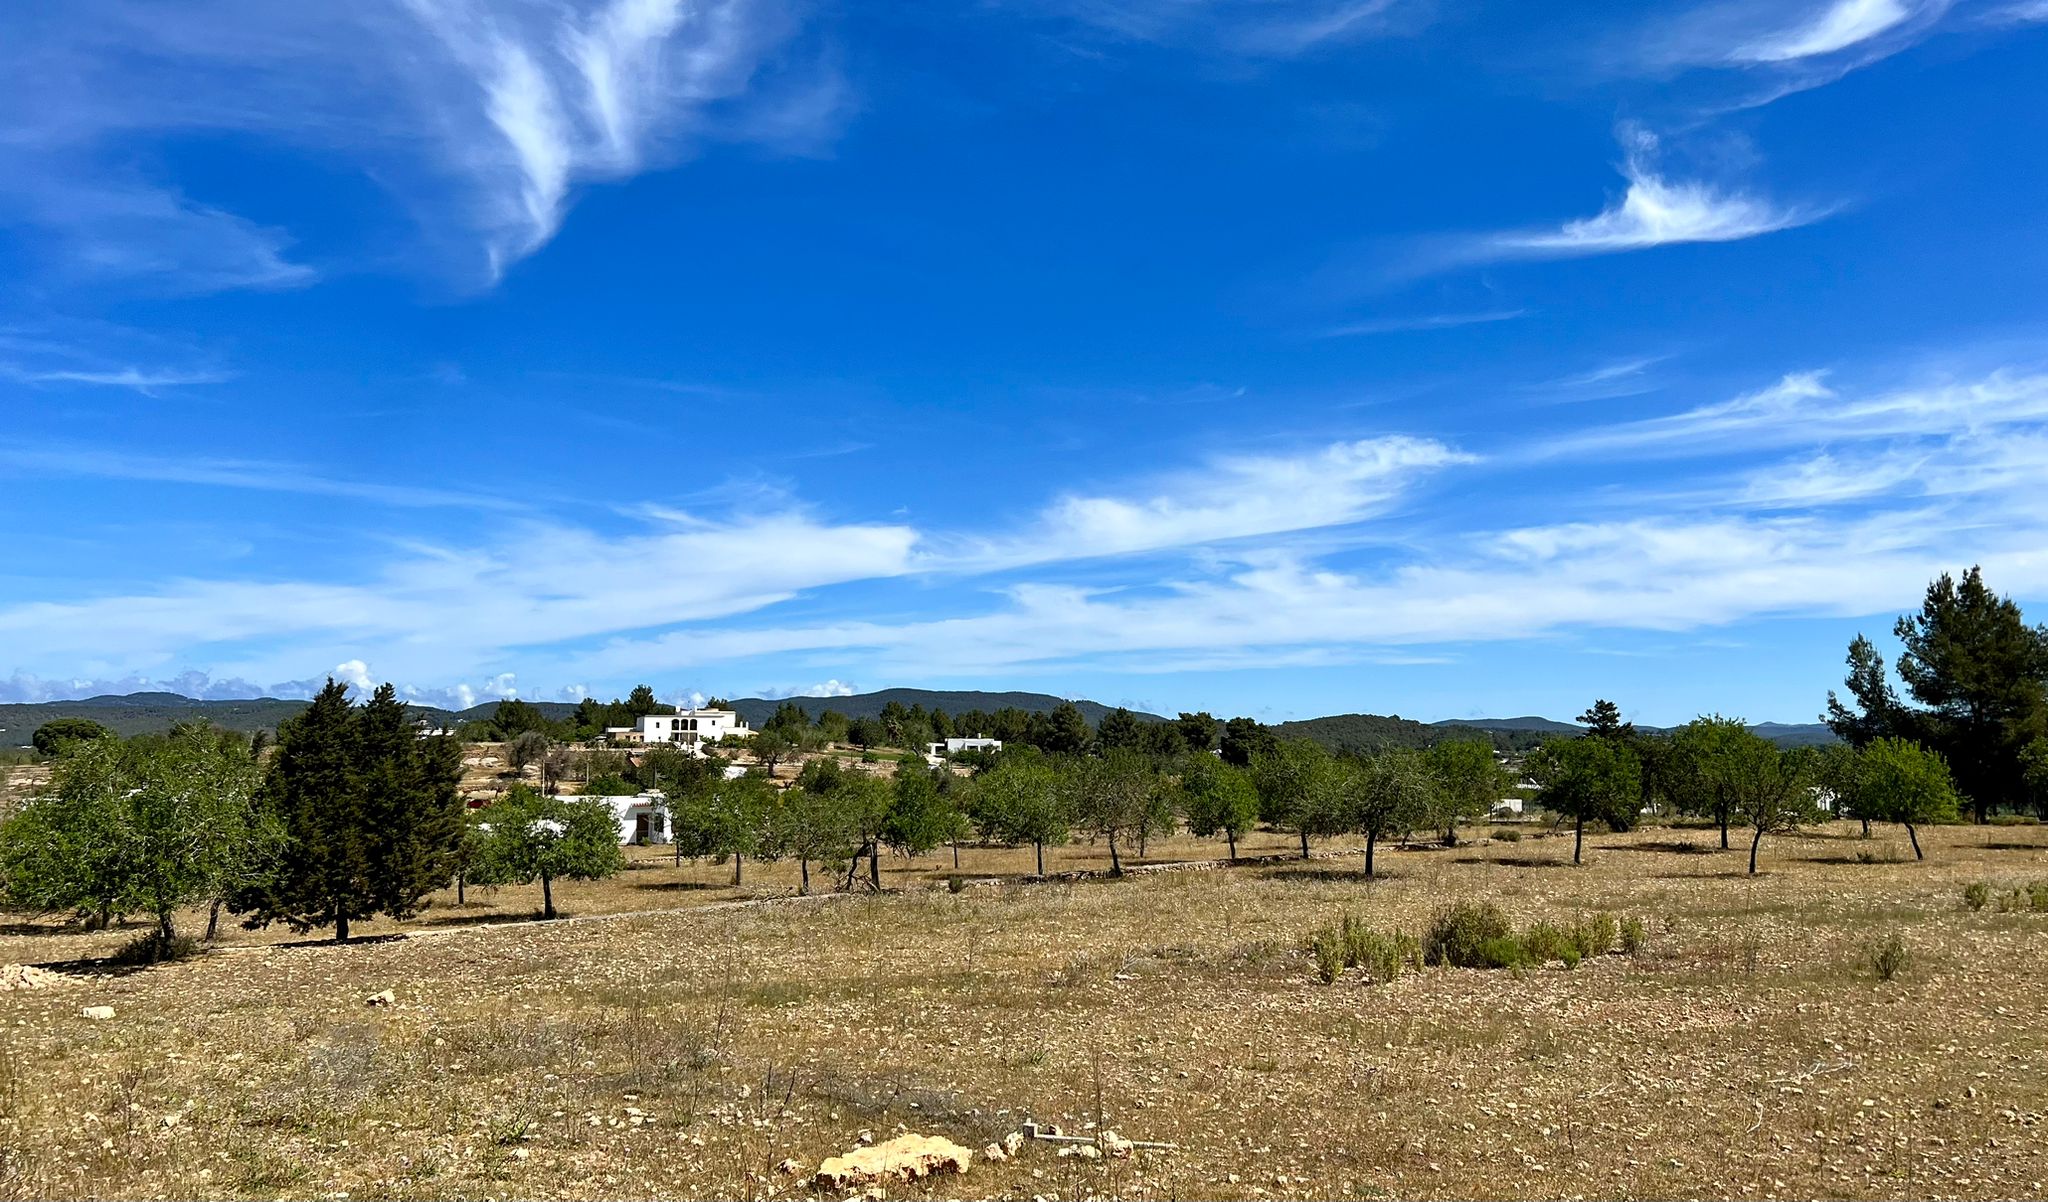 Plot of 28.000 sqm in Benimussa near San Rafael with license to build requested